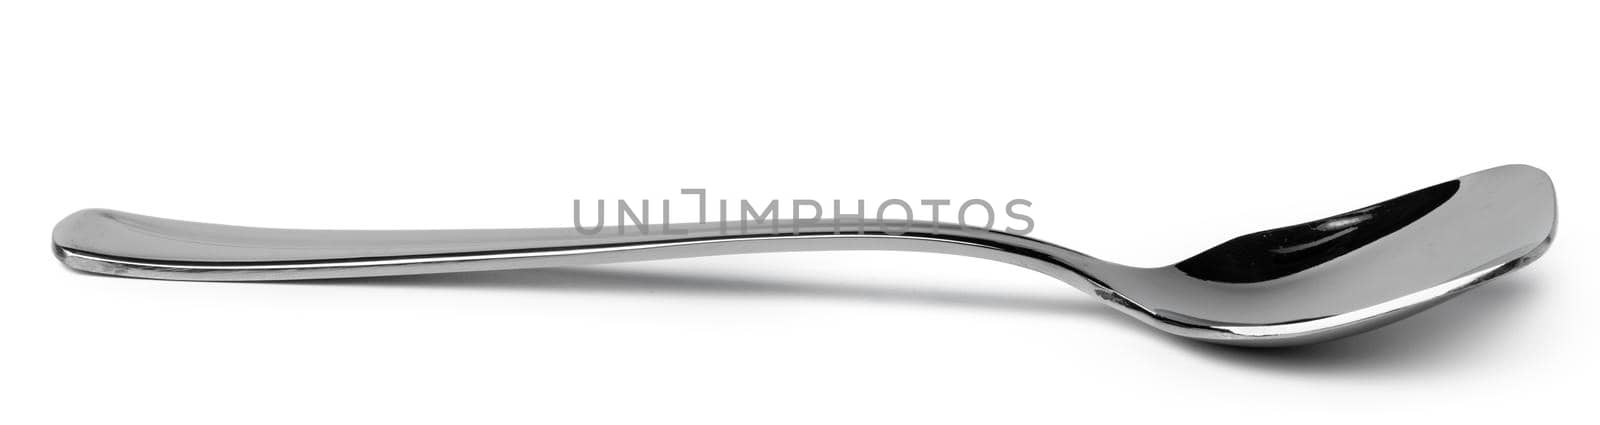 Stainless steel spoon isolated on white background by Fabrikasimf